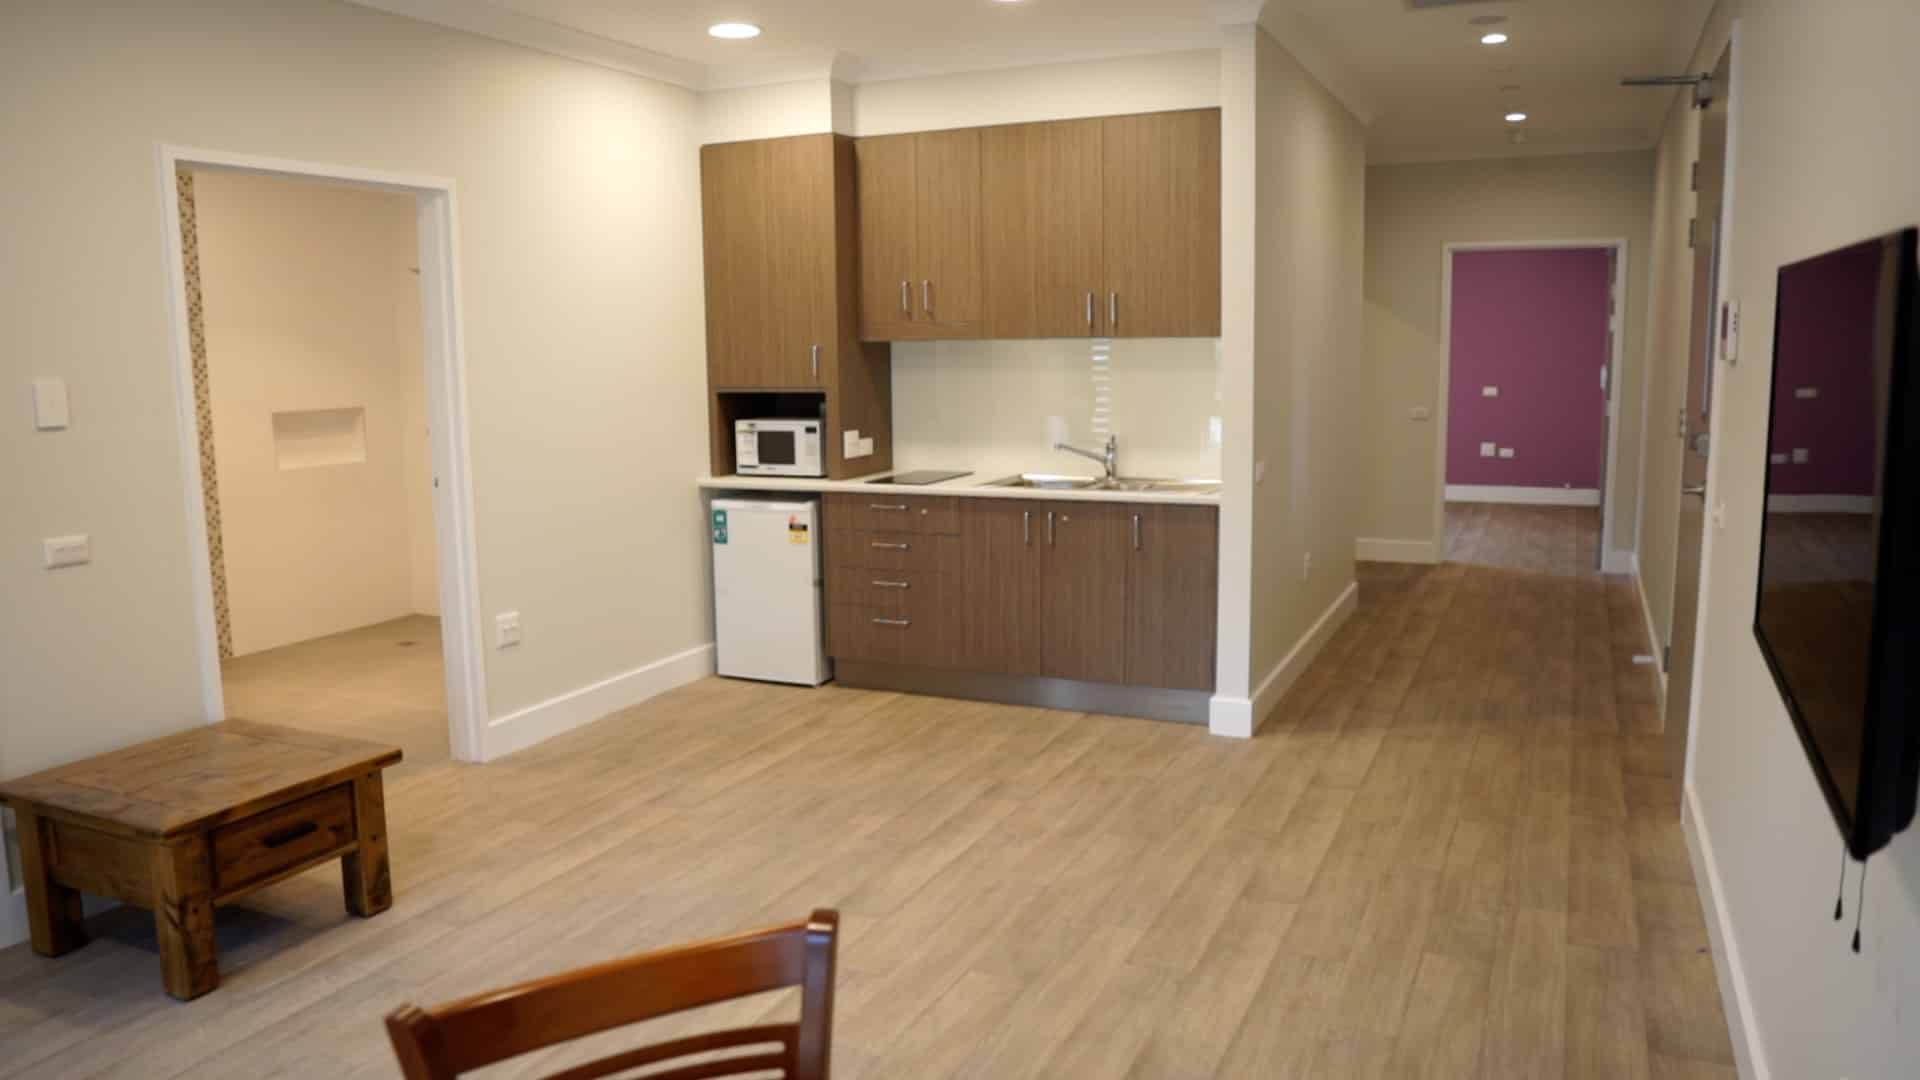 View of the unit showing a kitchen area.